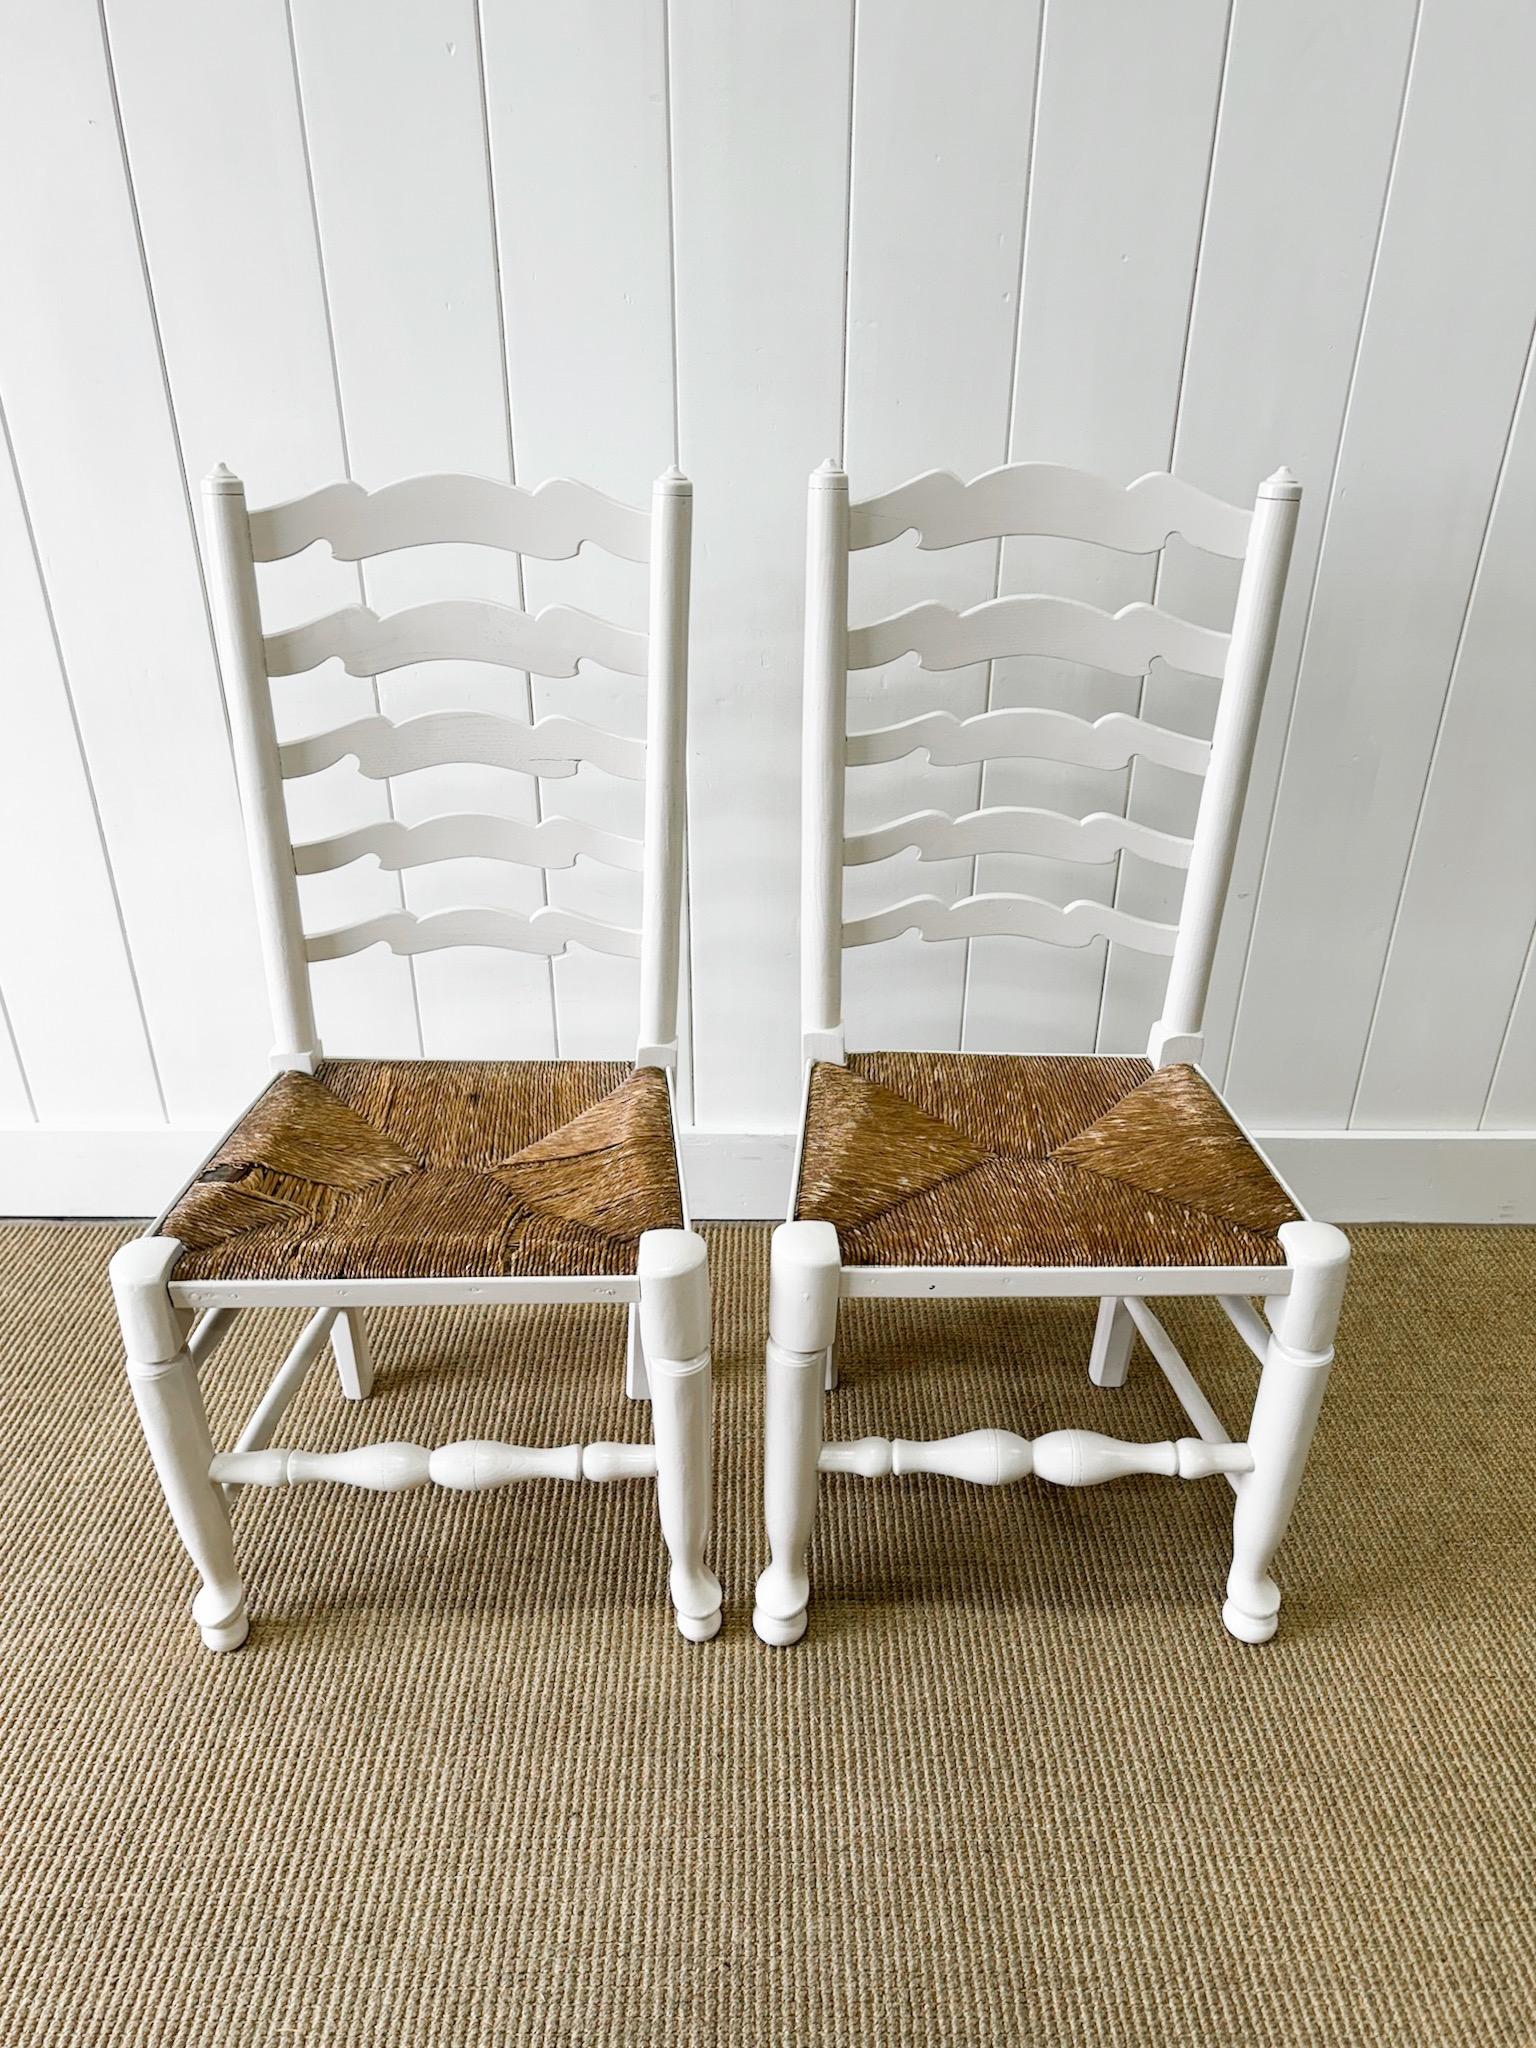 A Harlequin Set of 6 Painted English Ladder Back Chairs In Good Condition For Sale In Oak Park, MI